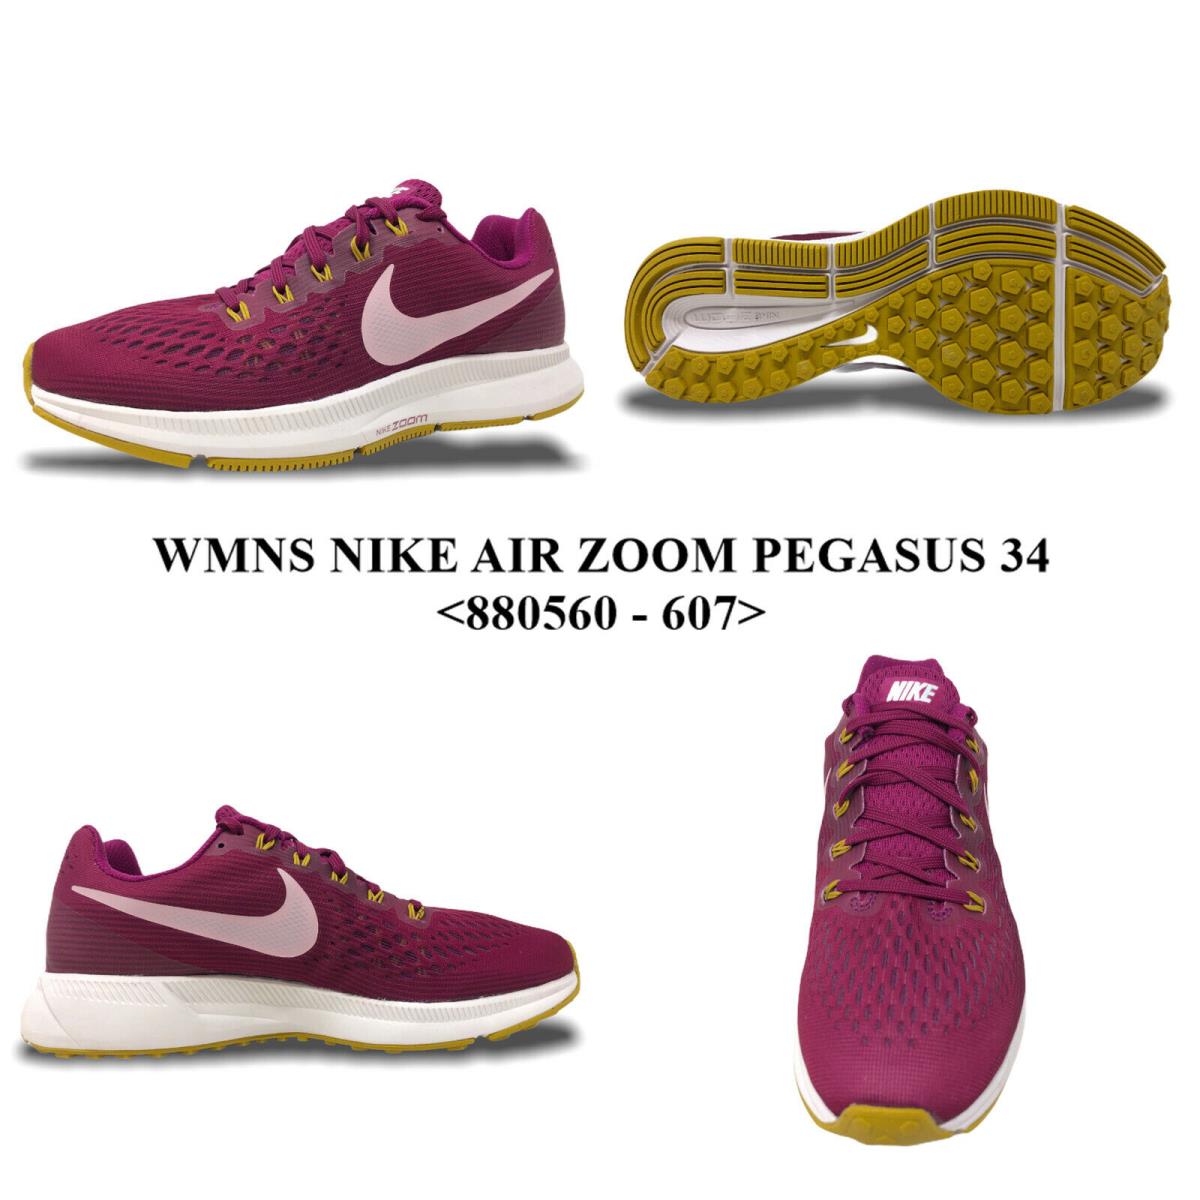 Women`s Nike Air Zoom Pegasus 34 <880560 - 607> Running/casual Shoe.new with Box